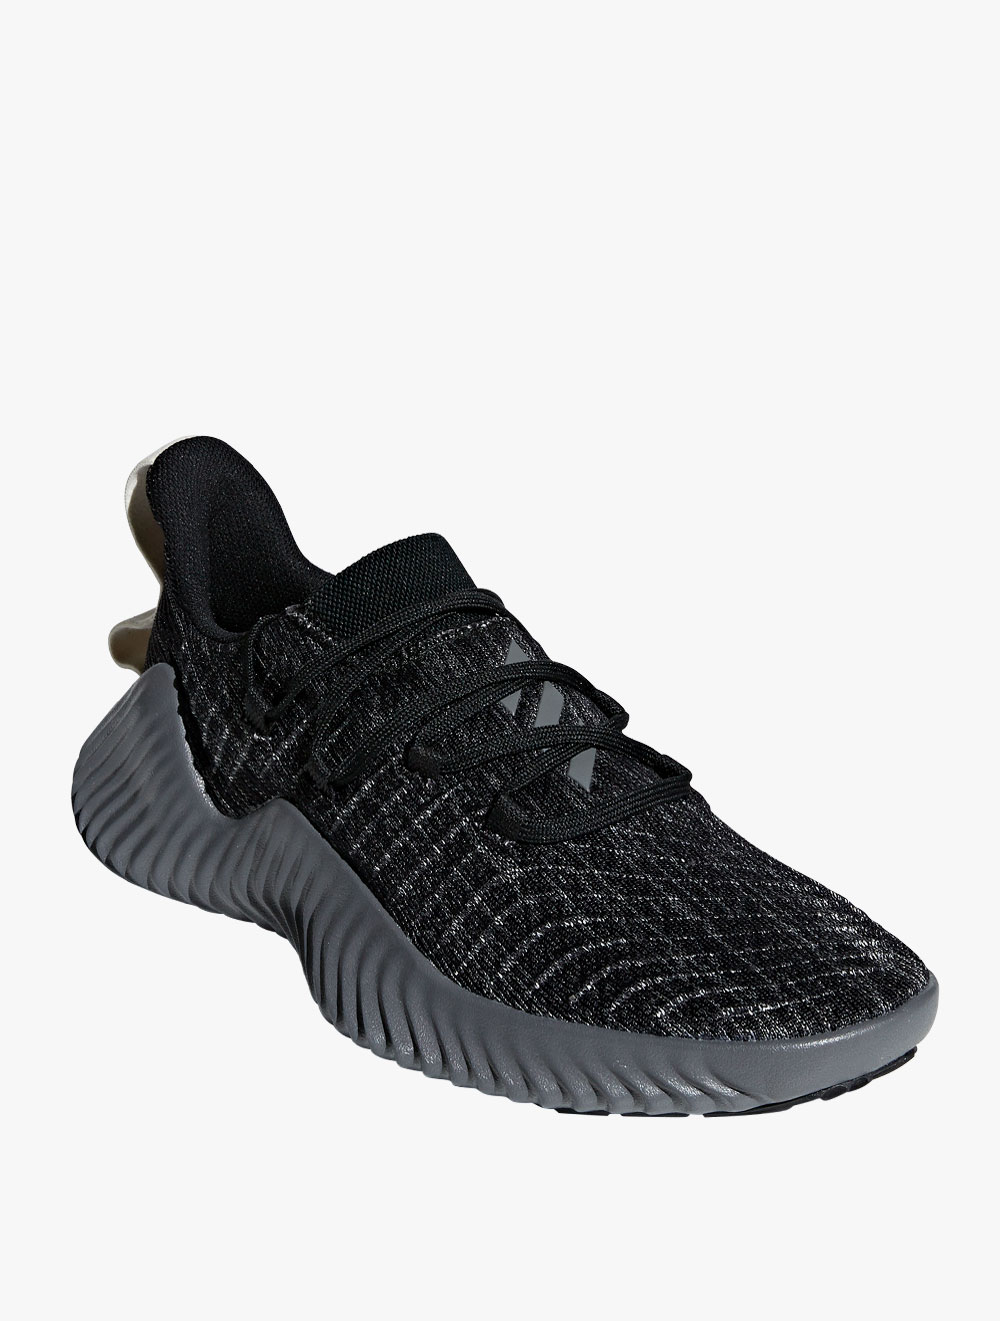 alphabounce trainer mens